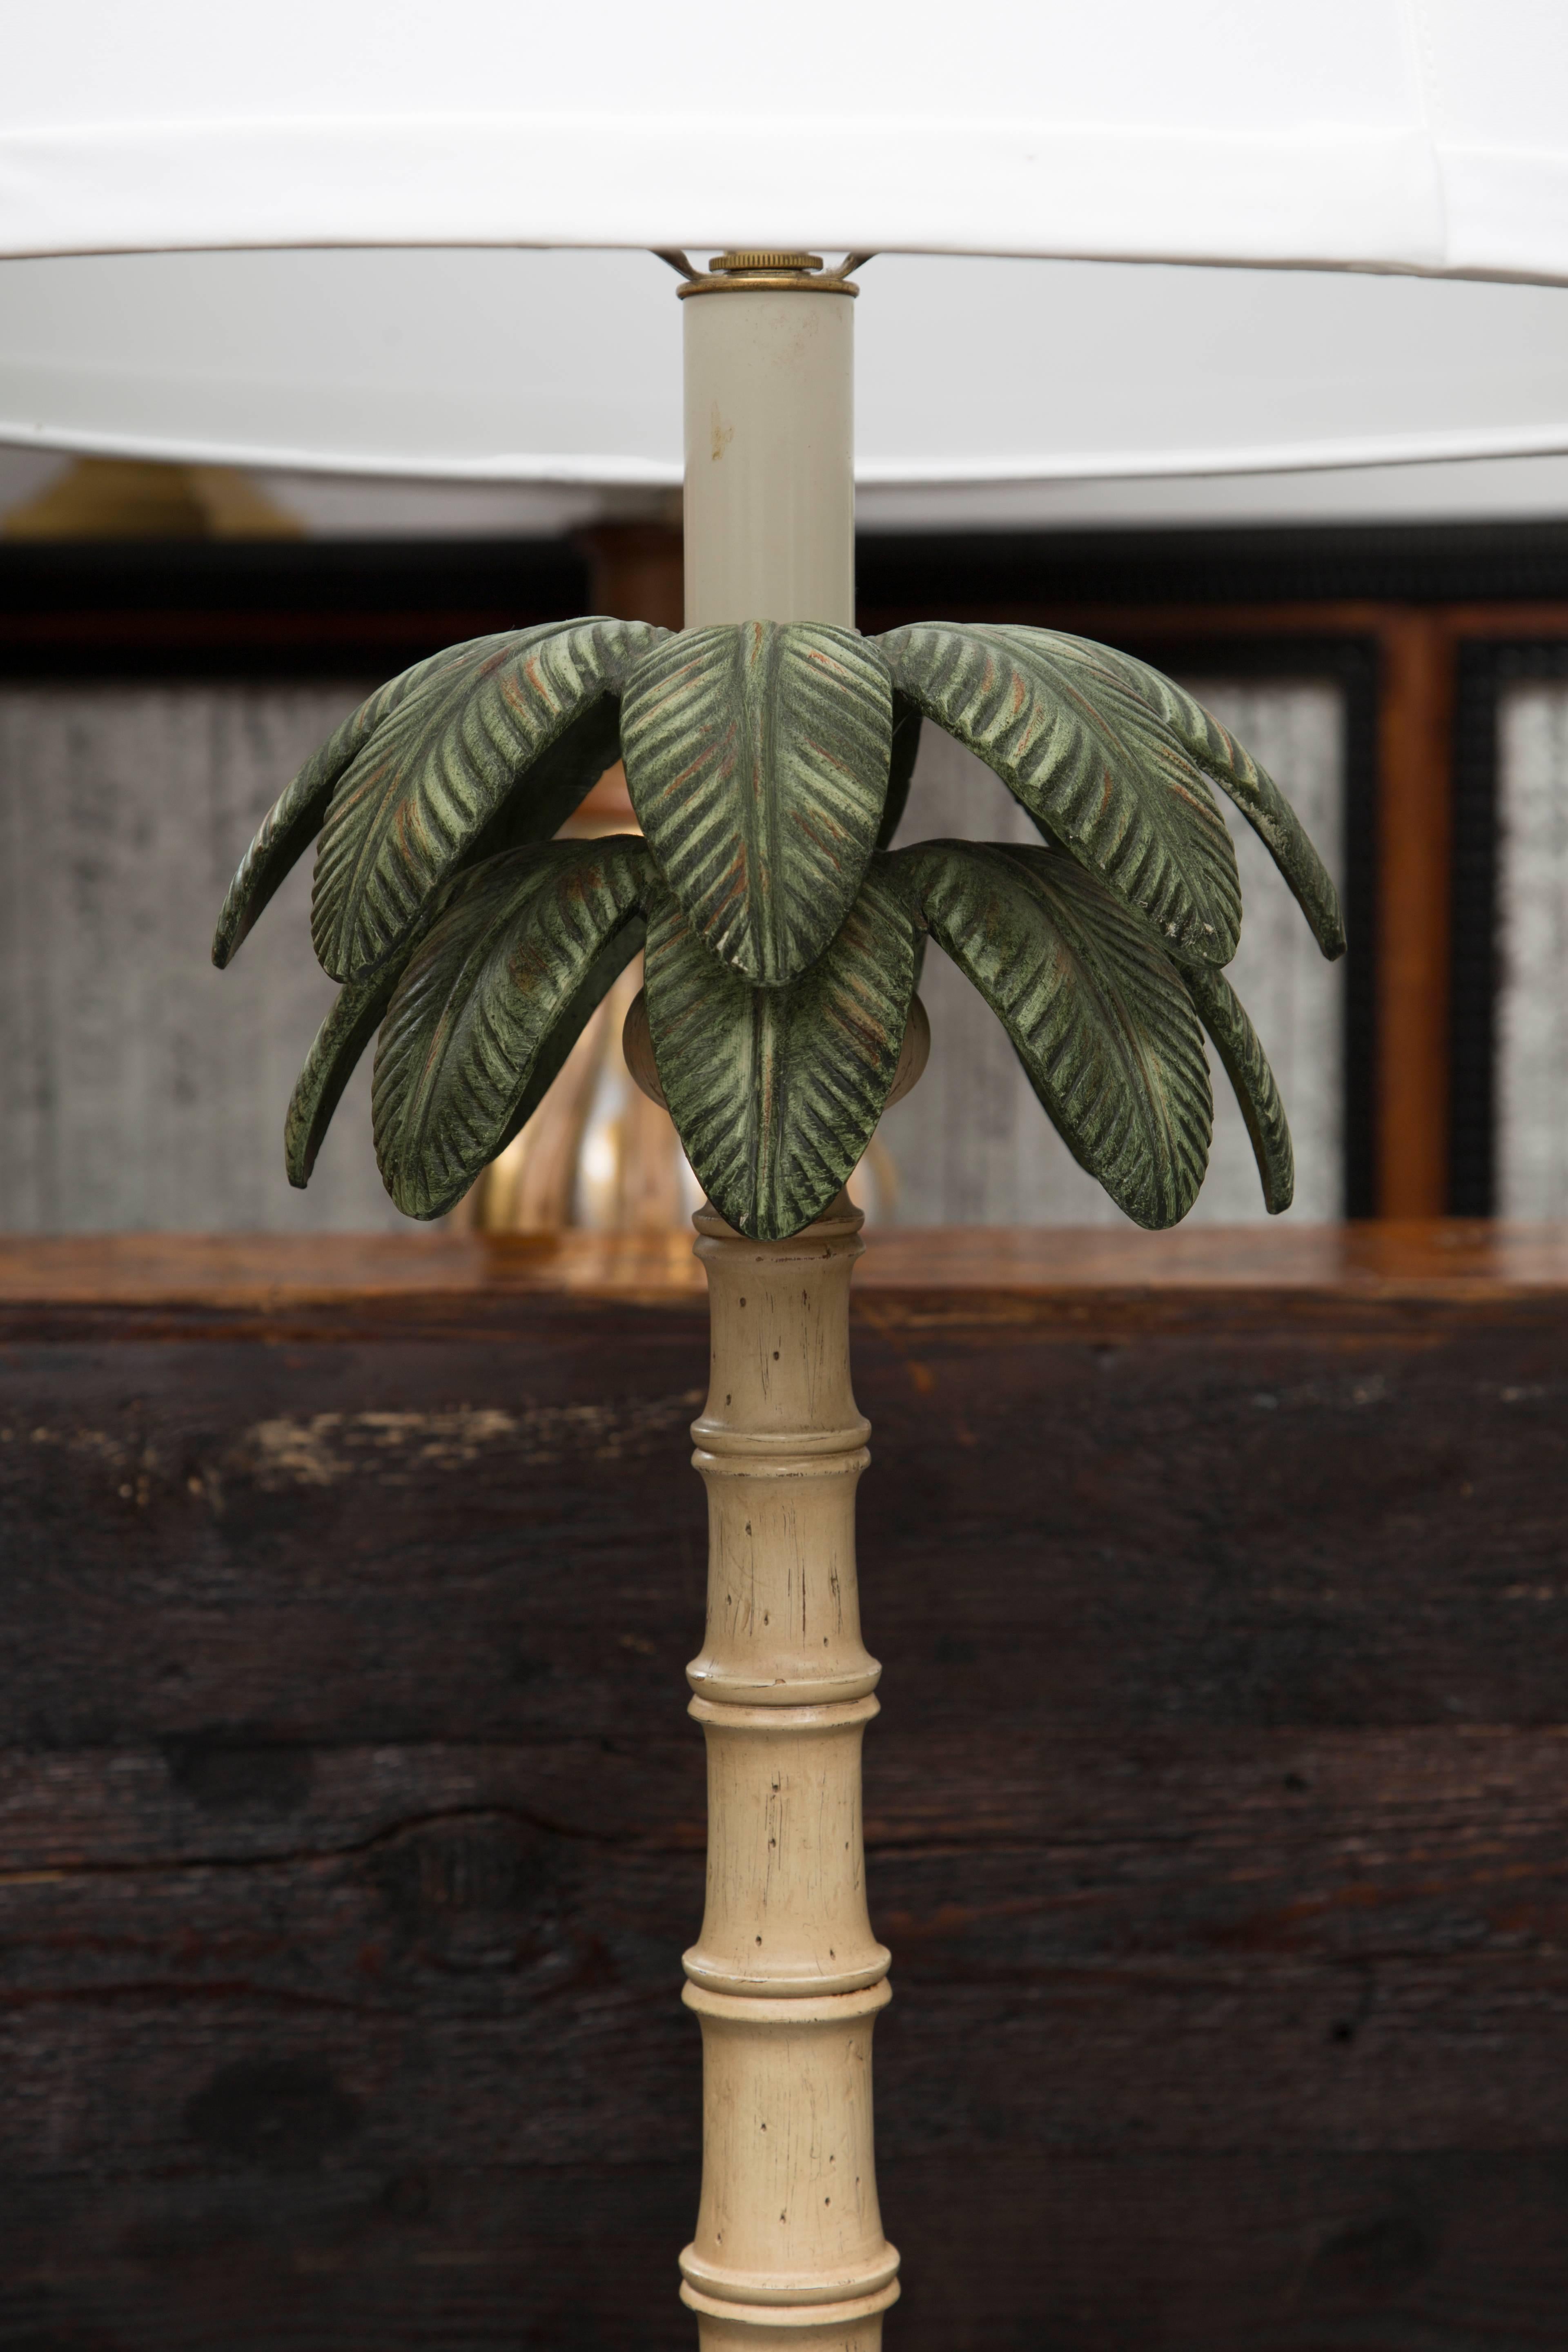 This polychromed tole floor lamp is in the form of a palm tree with green fronds above a cream shaft situated on a square base, 20th century.